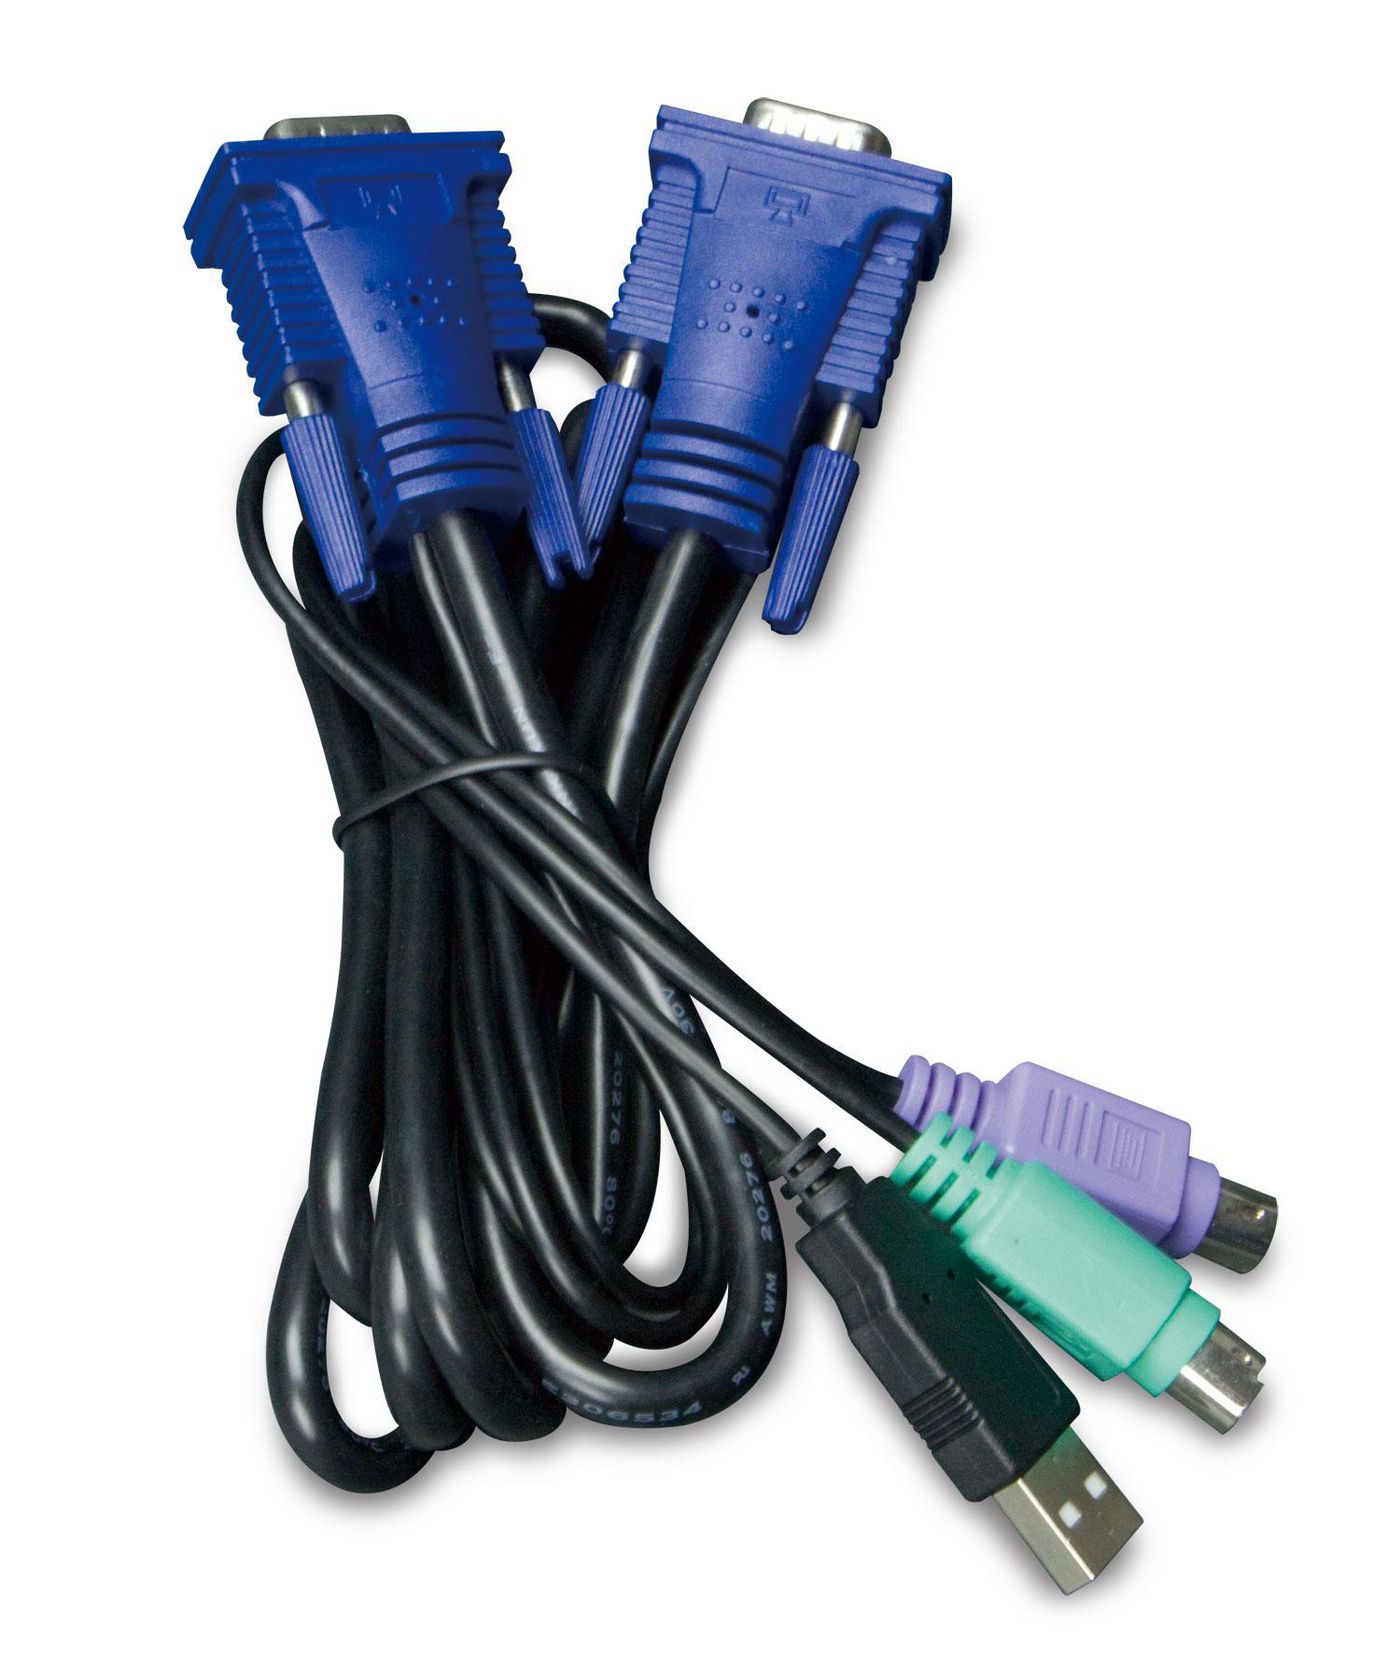 5.0M USB KVM Cable w built-in